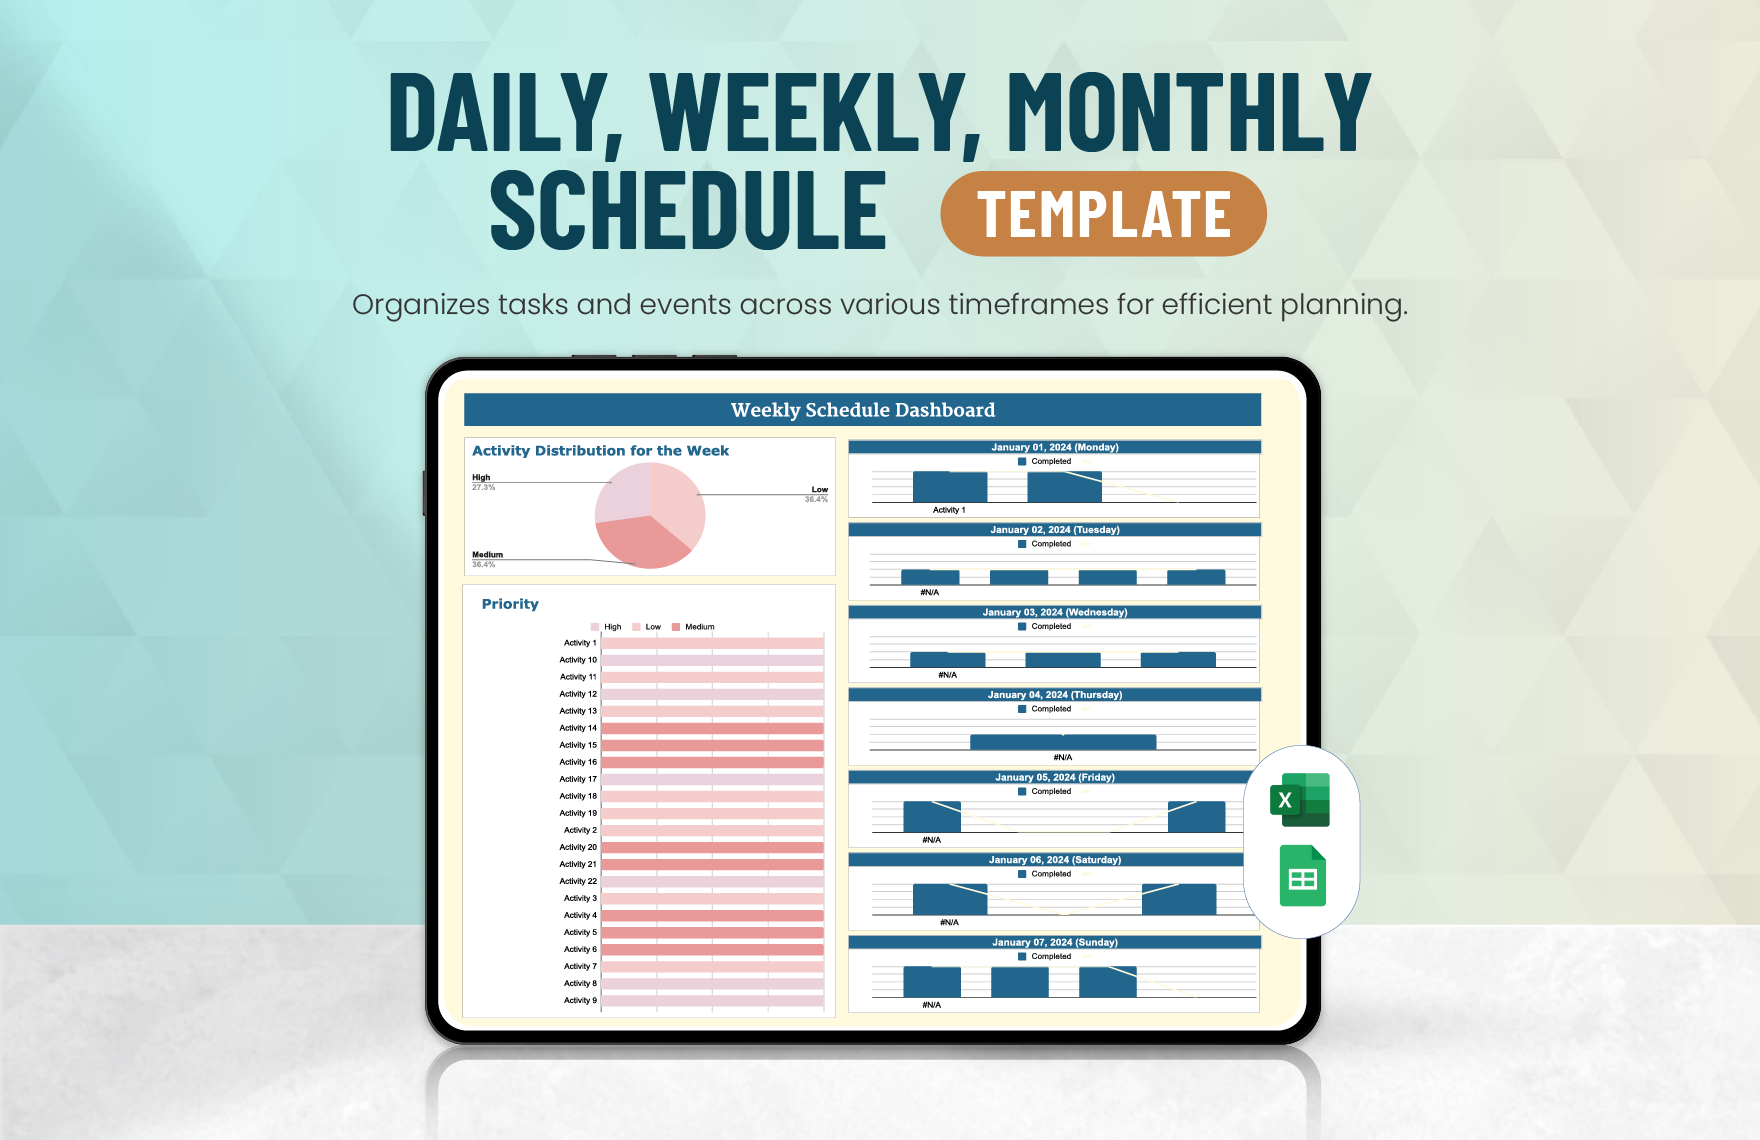 Daily, Weekly, Monthly Schedule Template